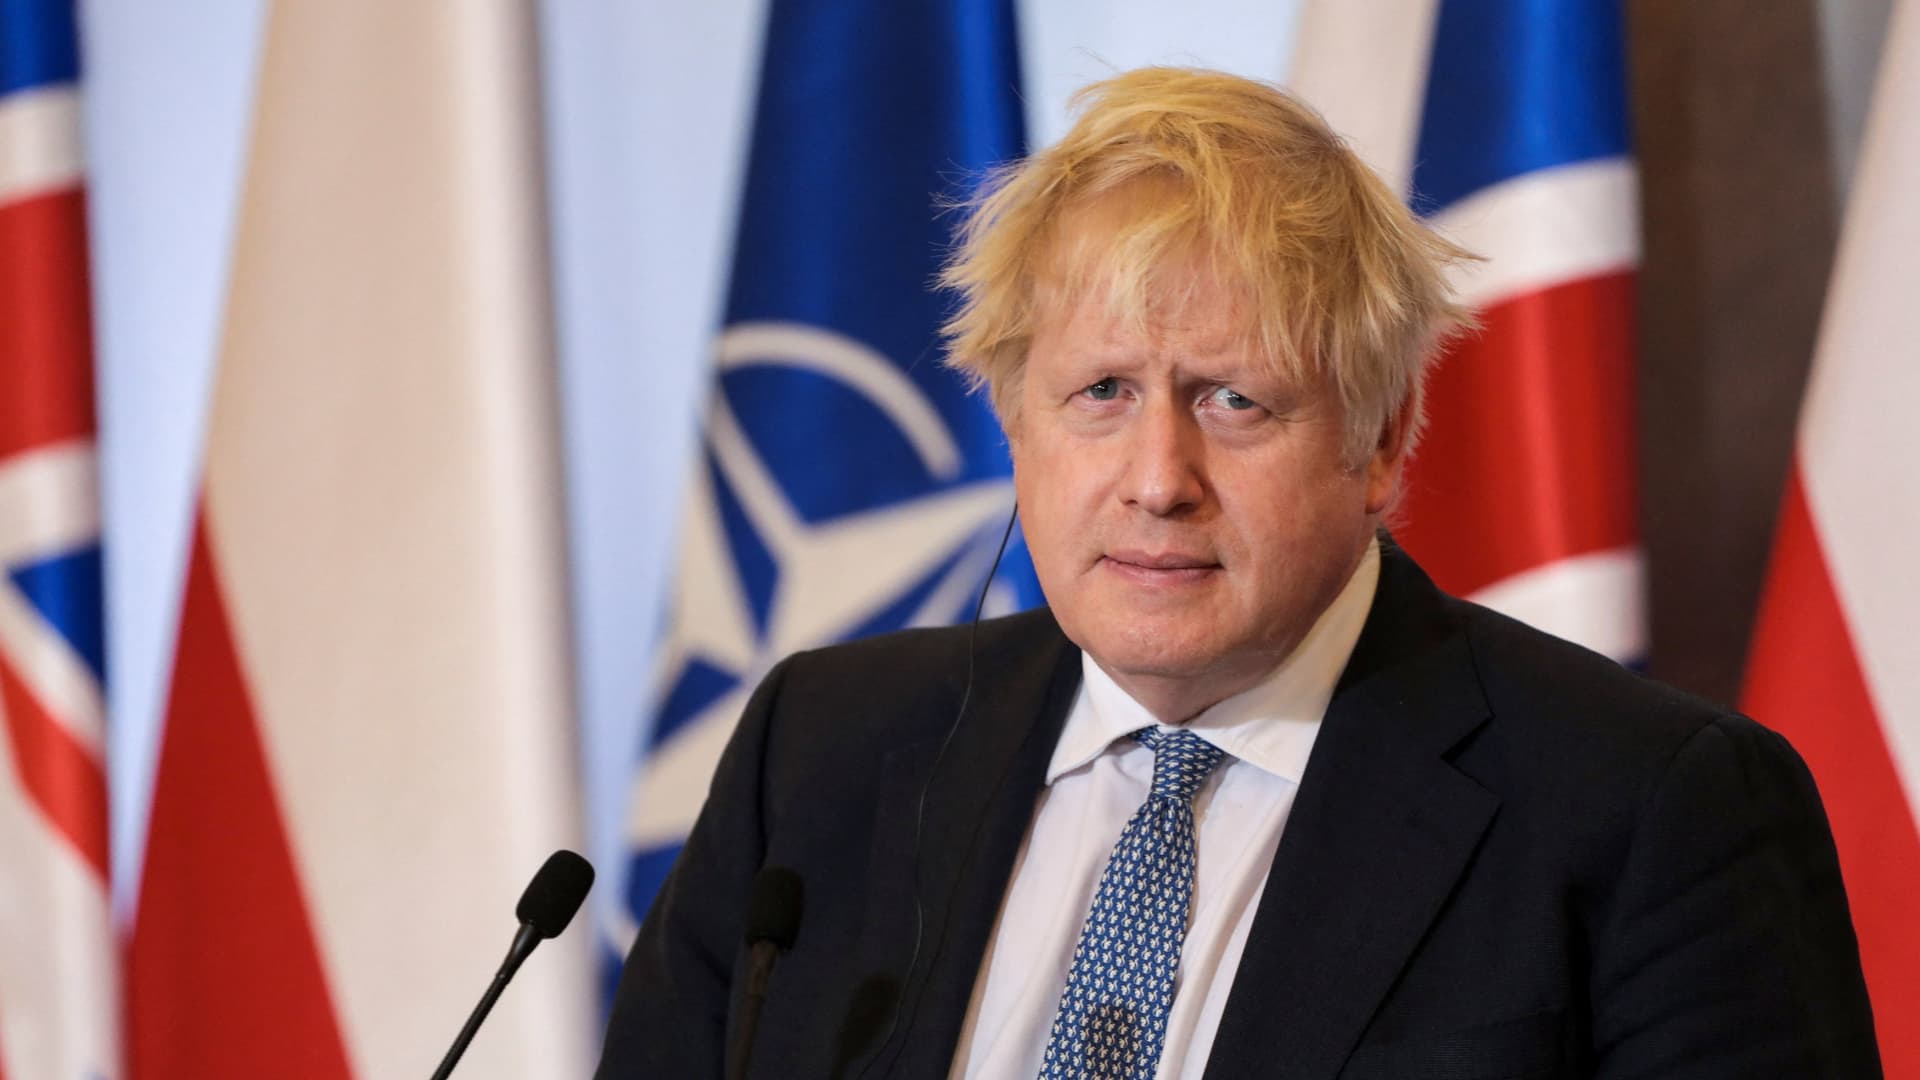 Britain's Prime Minister Boris Johnson attends a joint news conference with Polish Prime Minister Mateusz Morawiecki (not pictured) in Warsaw, Poland February 10, 2022.